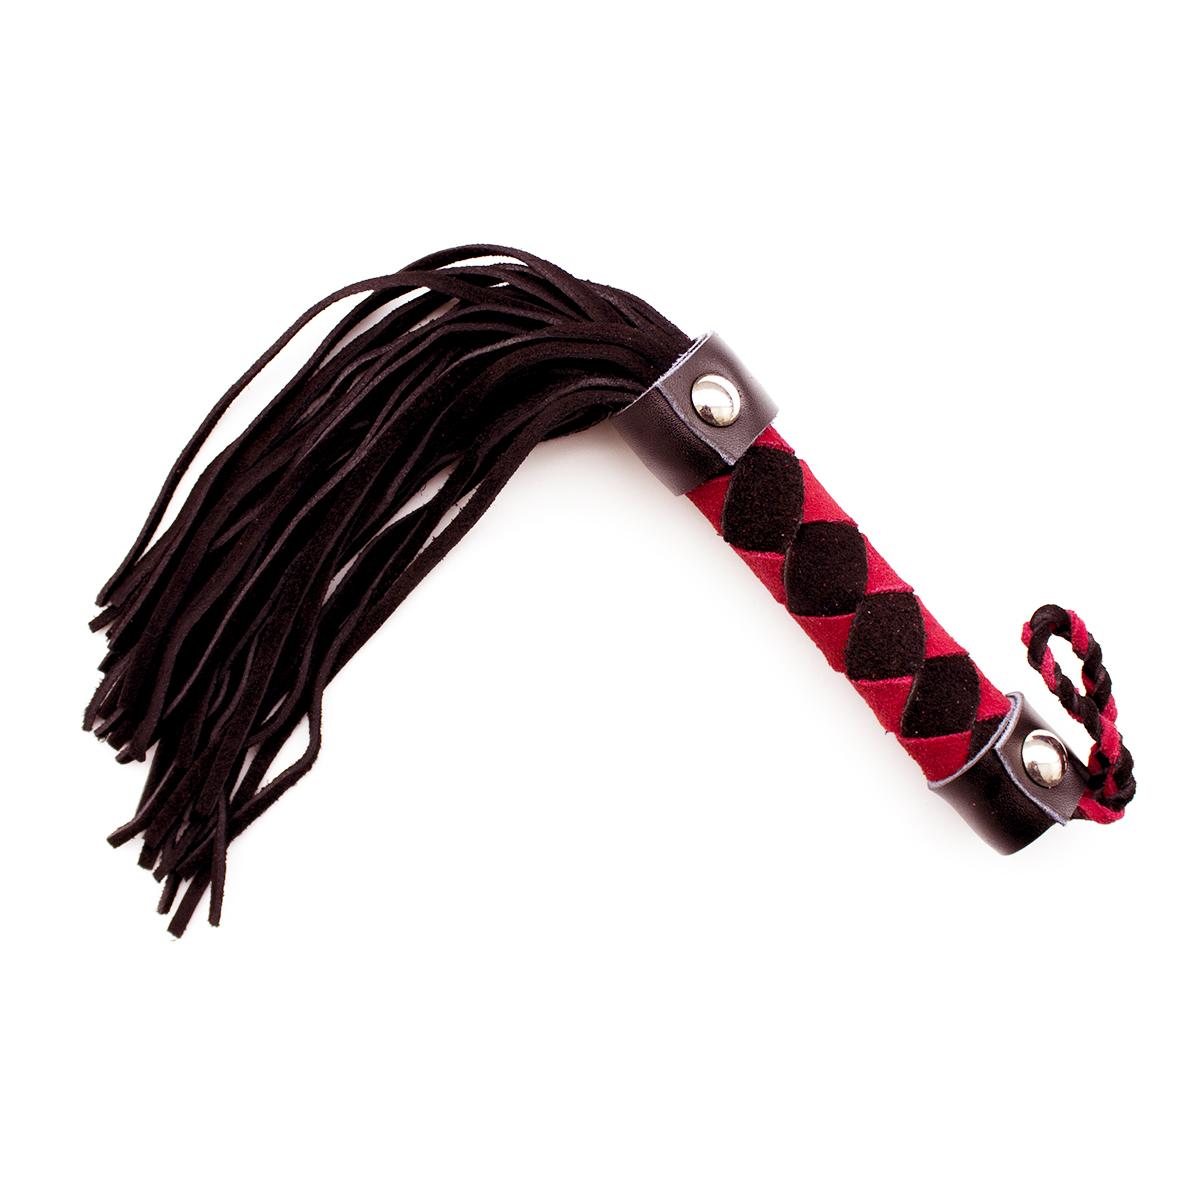 Cold F. reccomend Whips whipping spank strap paddle